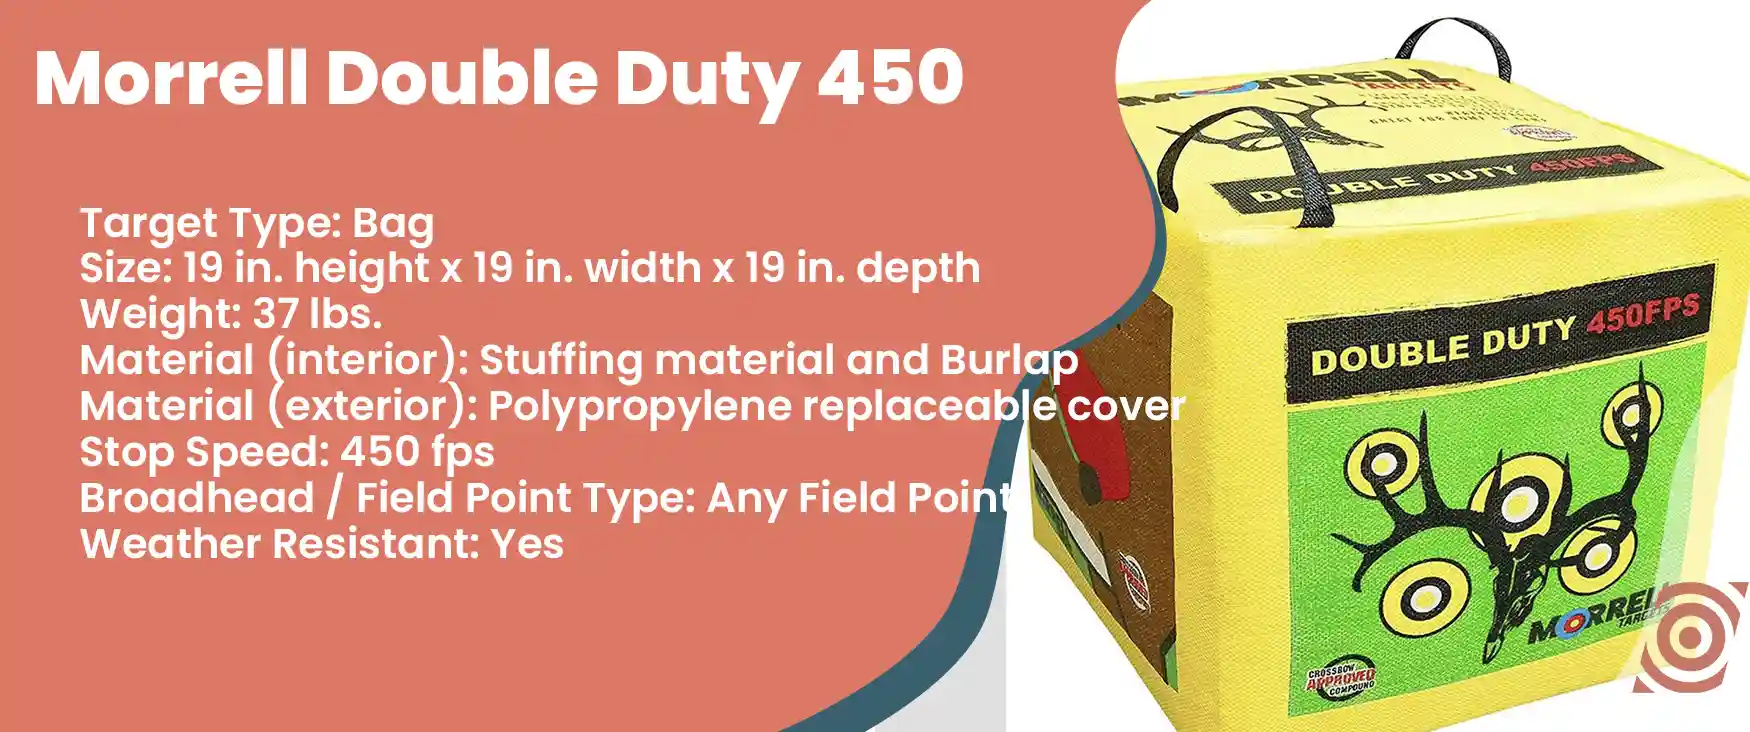 Morrell-Double-Duty-450-FPS